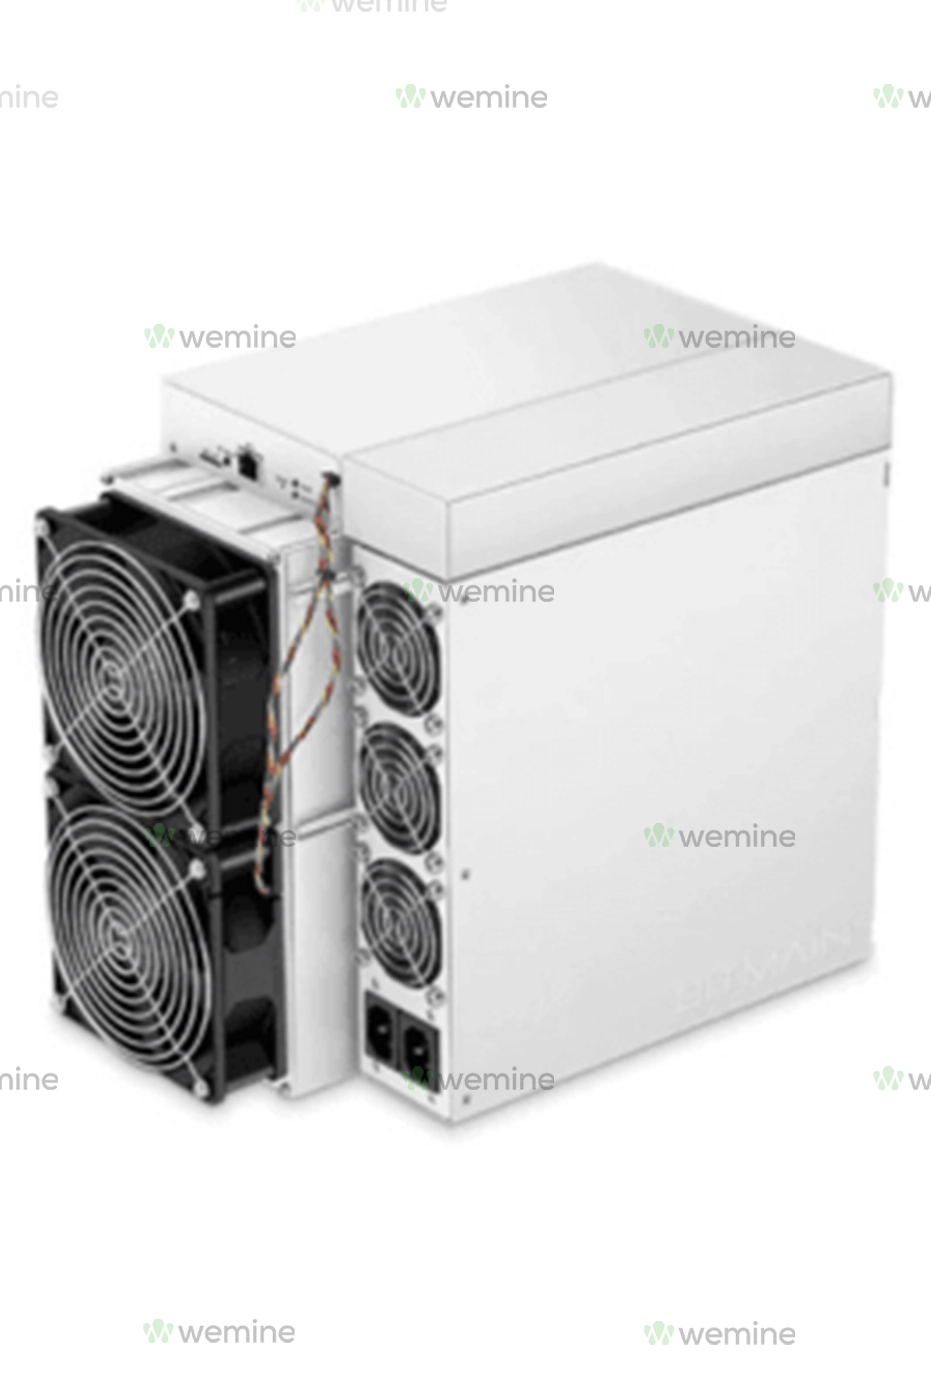 Antminer K7 with 63.5TH/s hash rate for mining, displayed with multiple cooling fans and power connectors, housed in a classic white casing